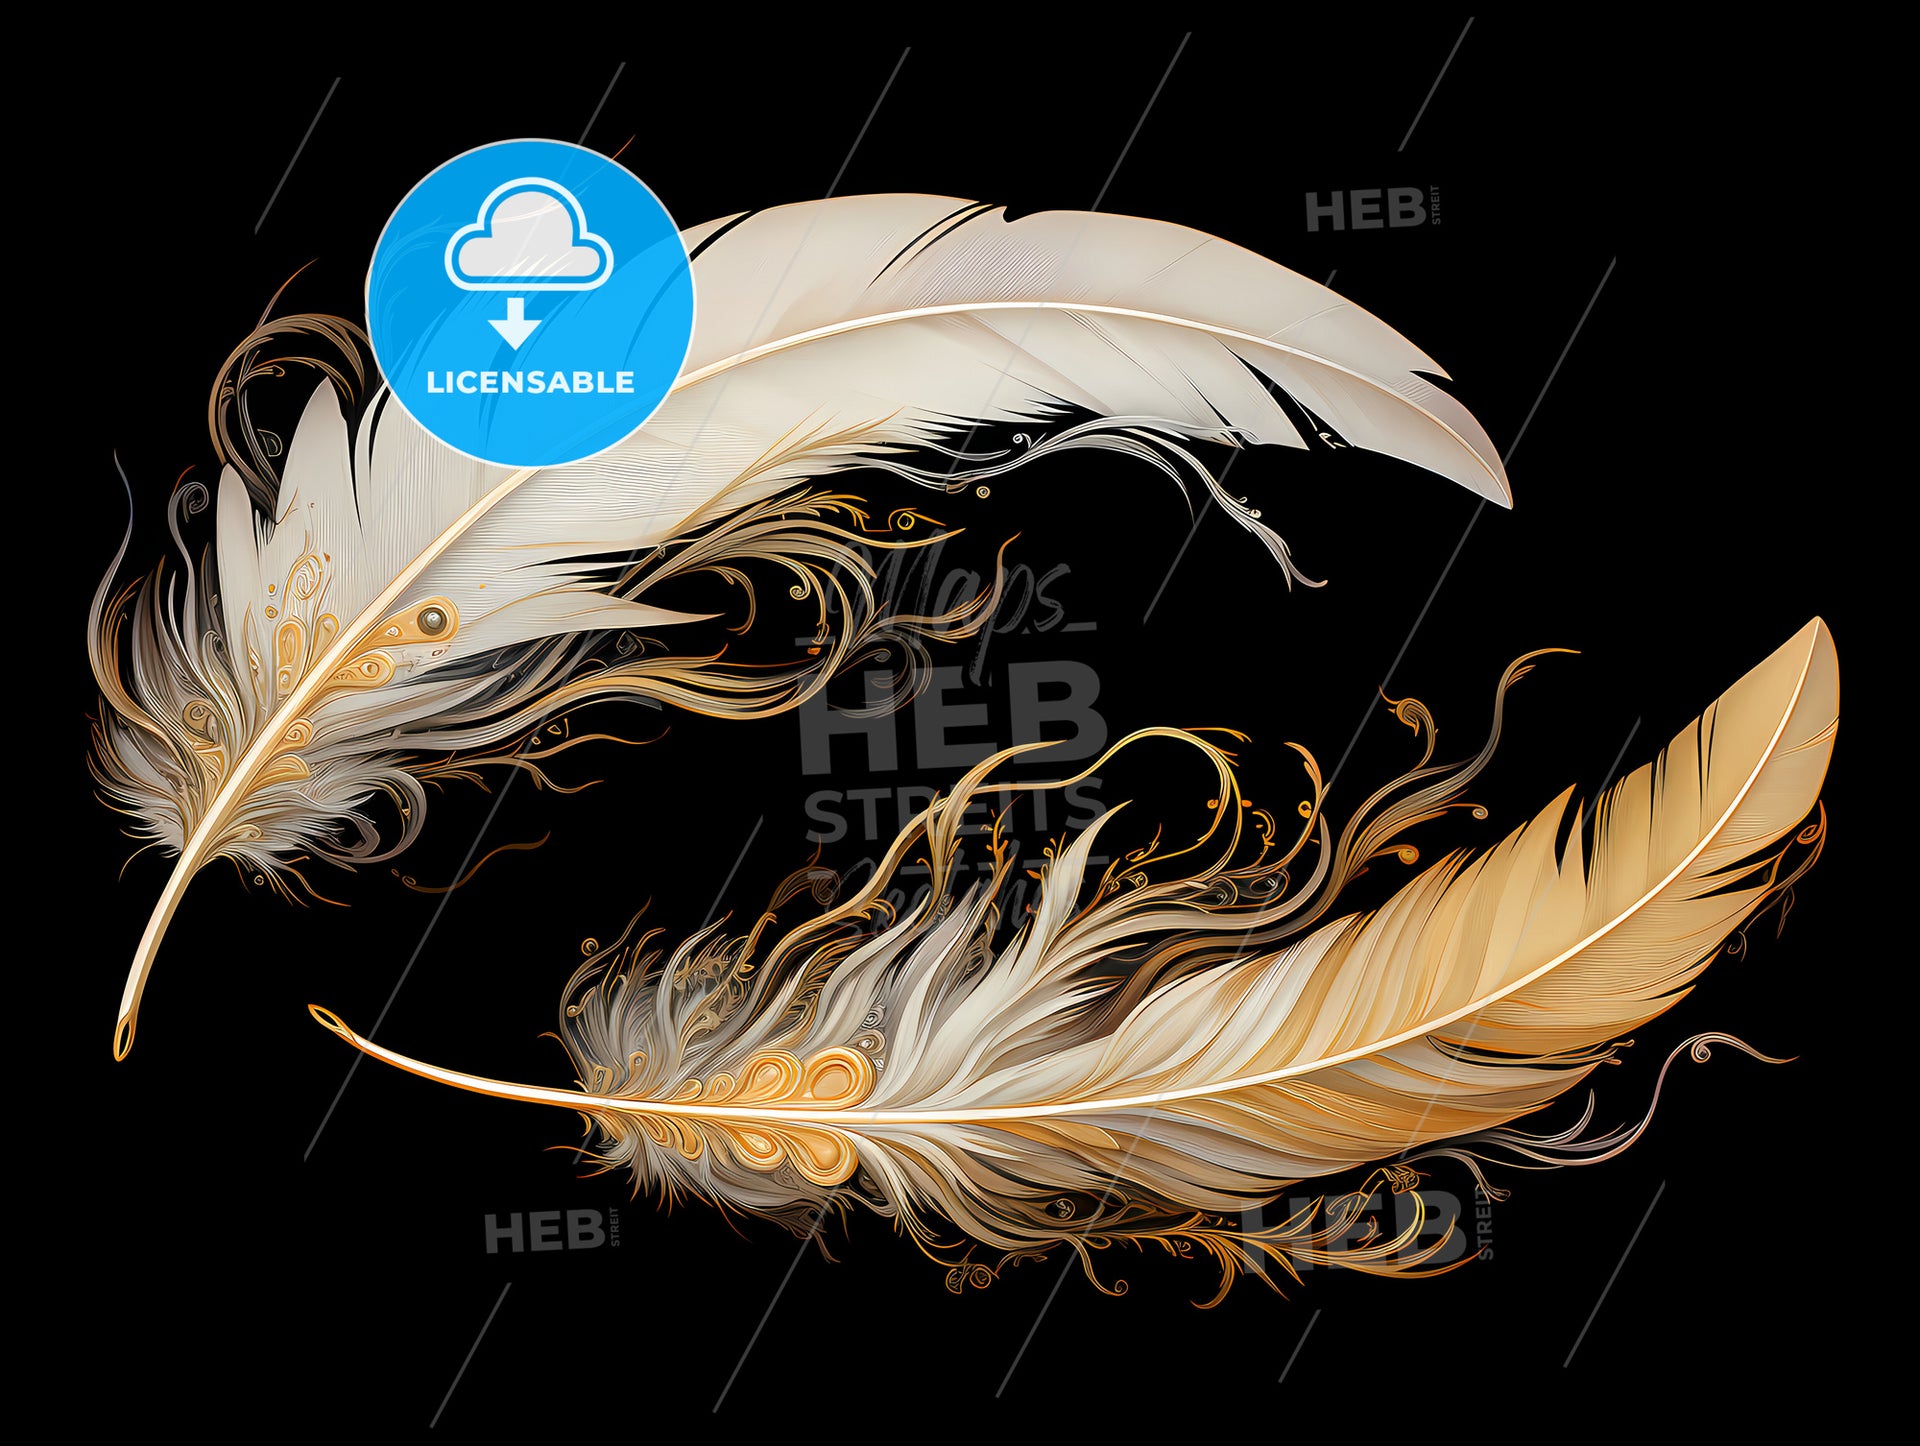 A Pair Of White And Gold Feathers - HEBSTREITS Stock Image